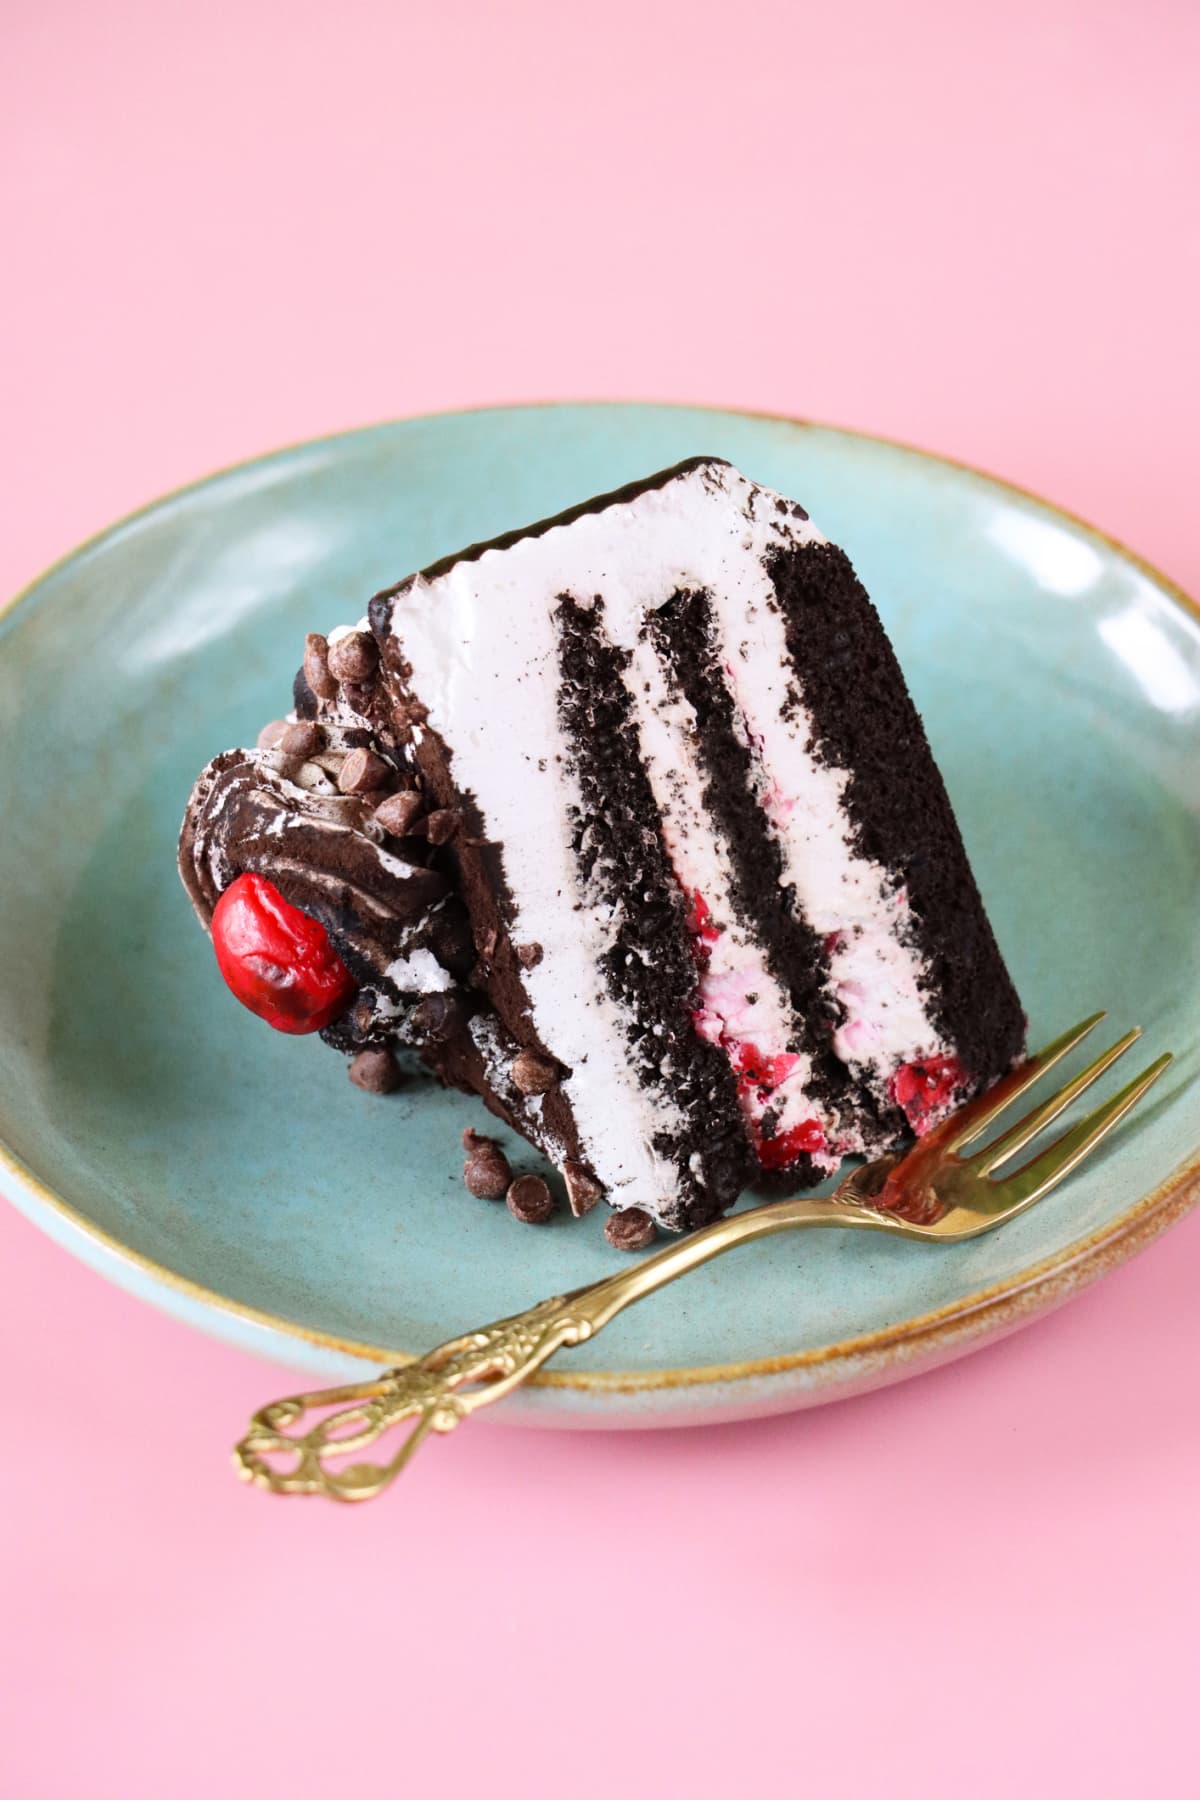 Slice of chocolate cake with white frosting and a cherry on a blue plate